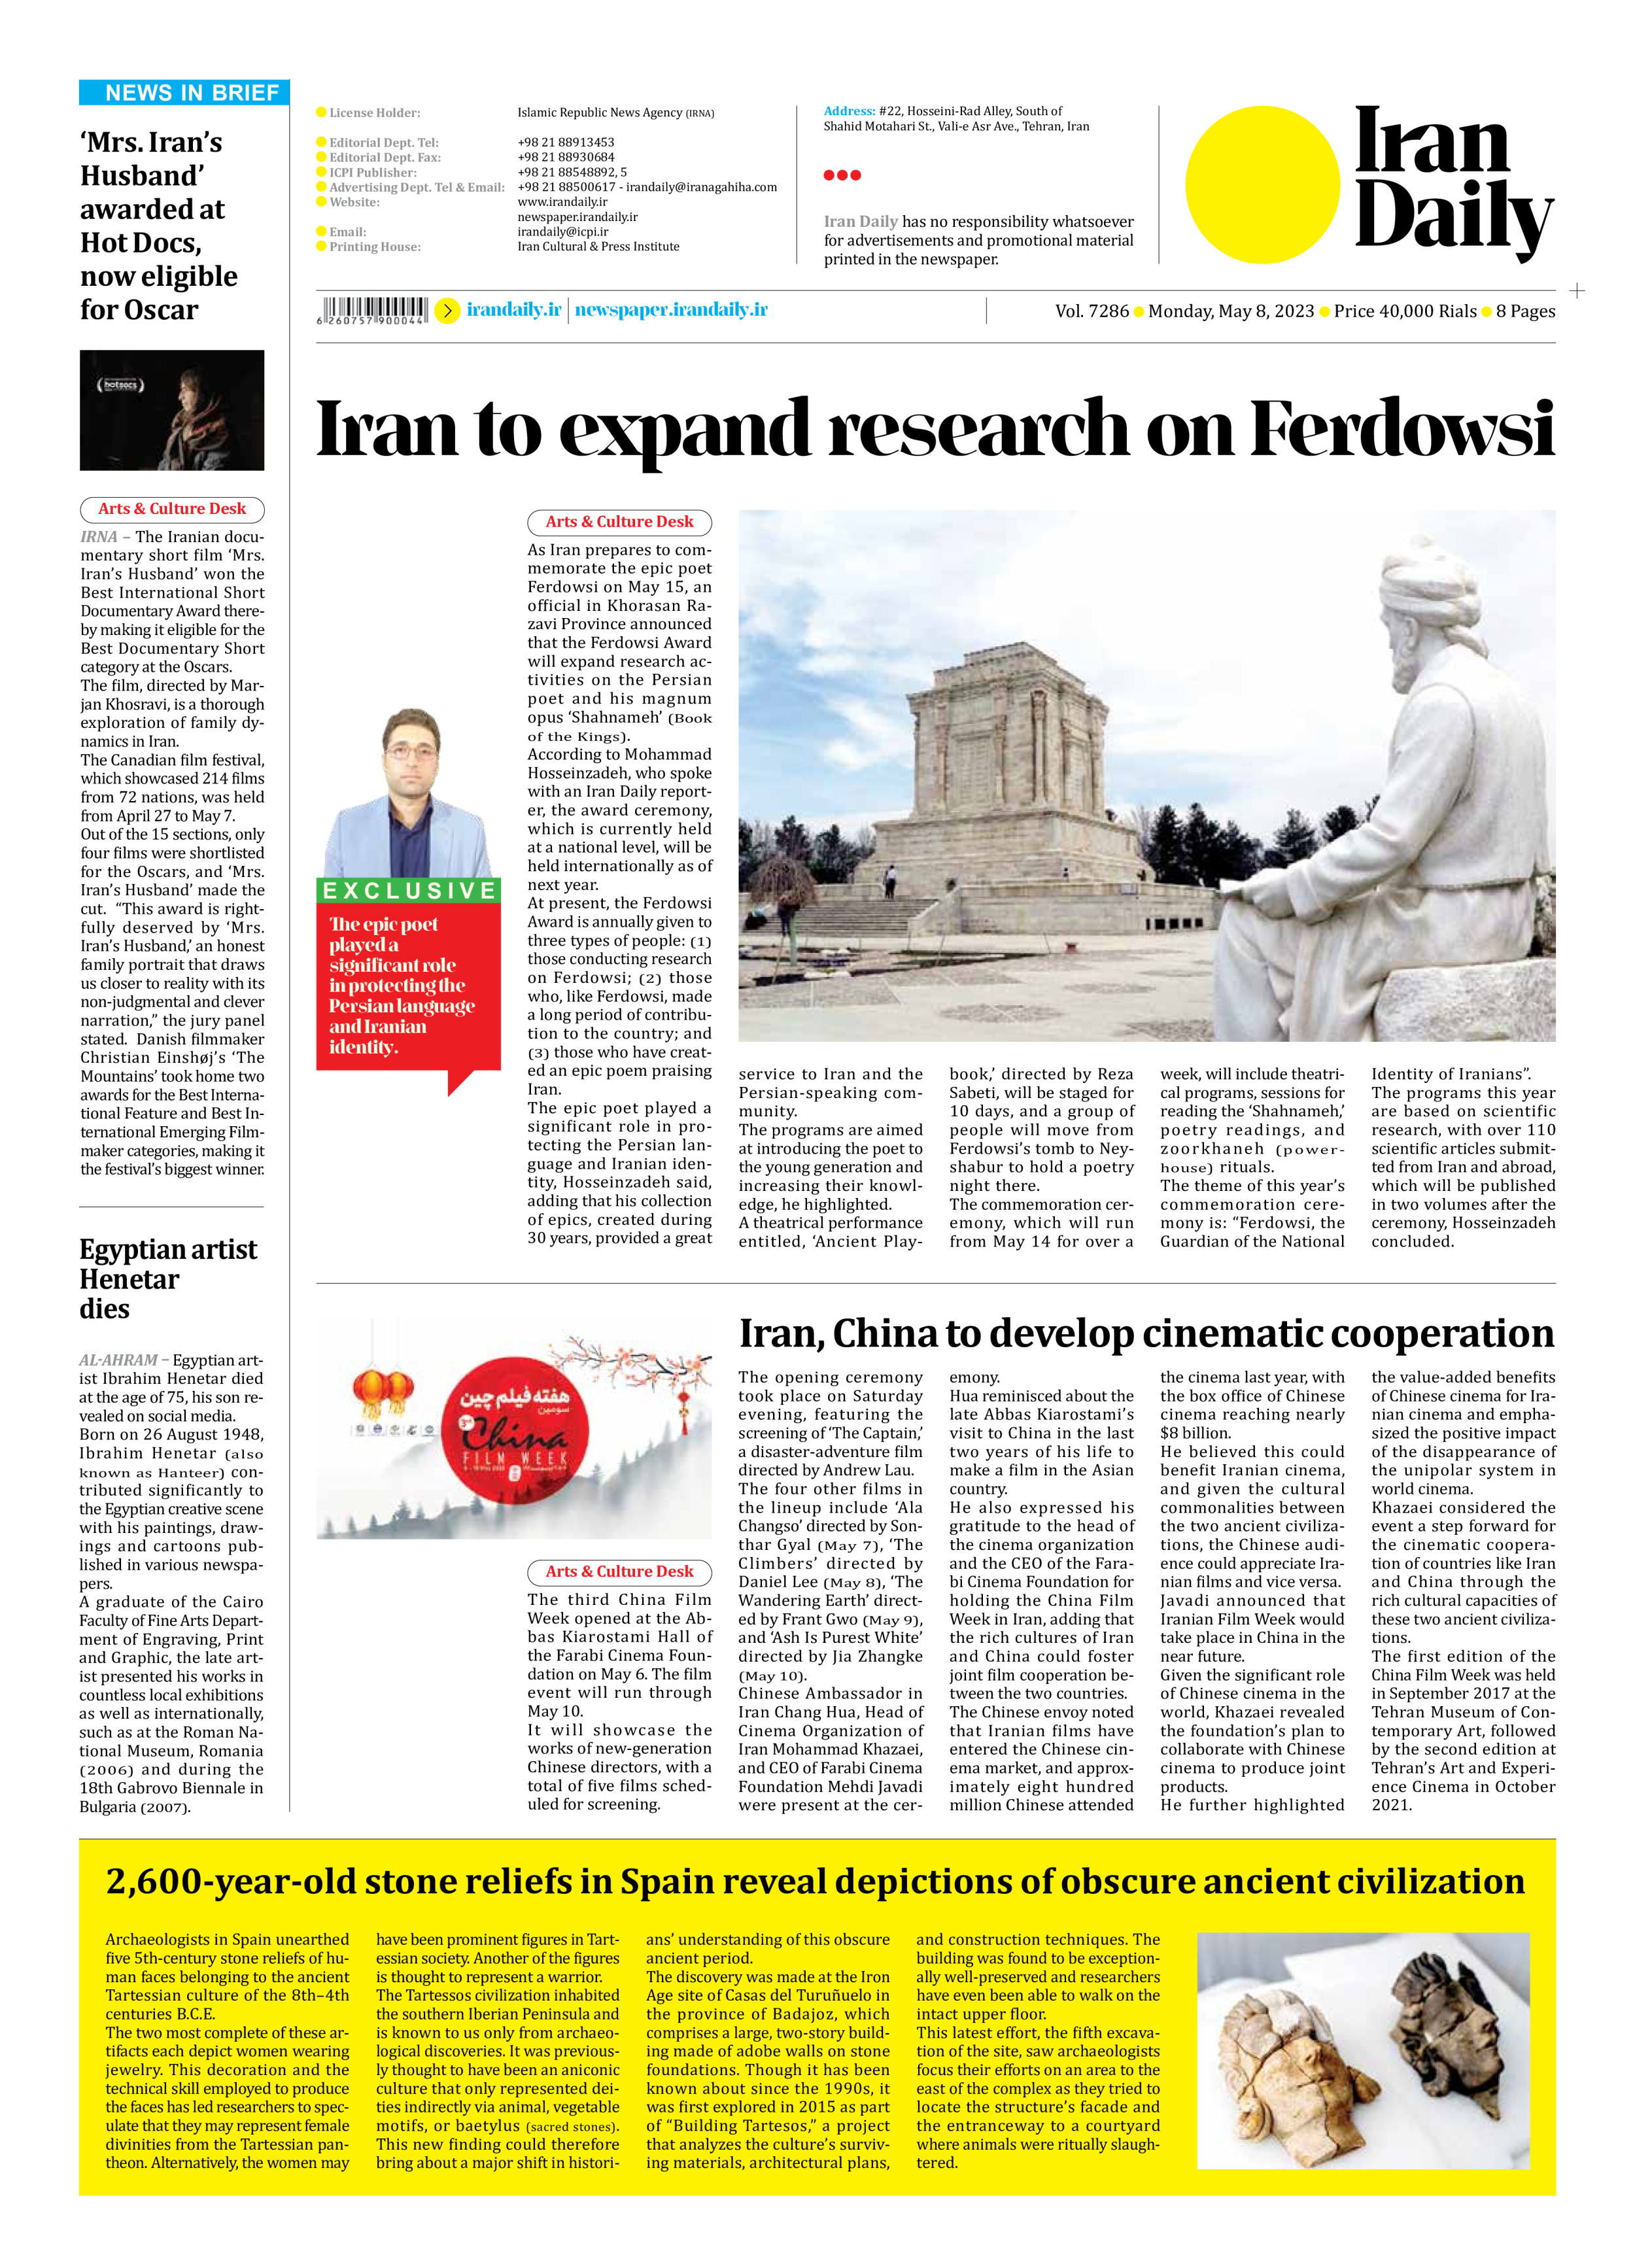 Iran Daily - Number Seven Thousand Two Hundred and Eighty Six - 08 May 2023 - Page 8